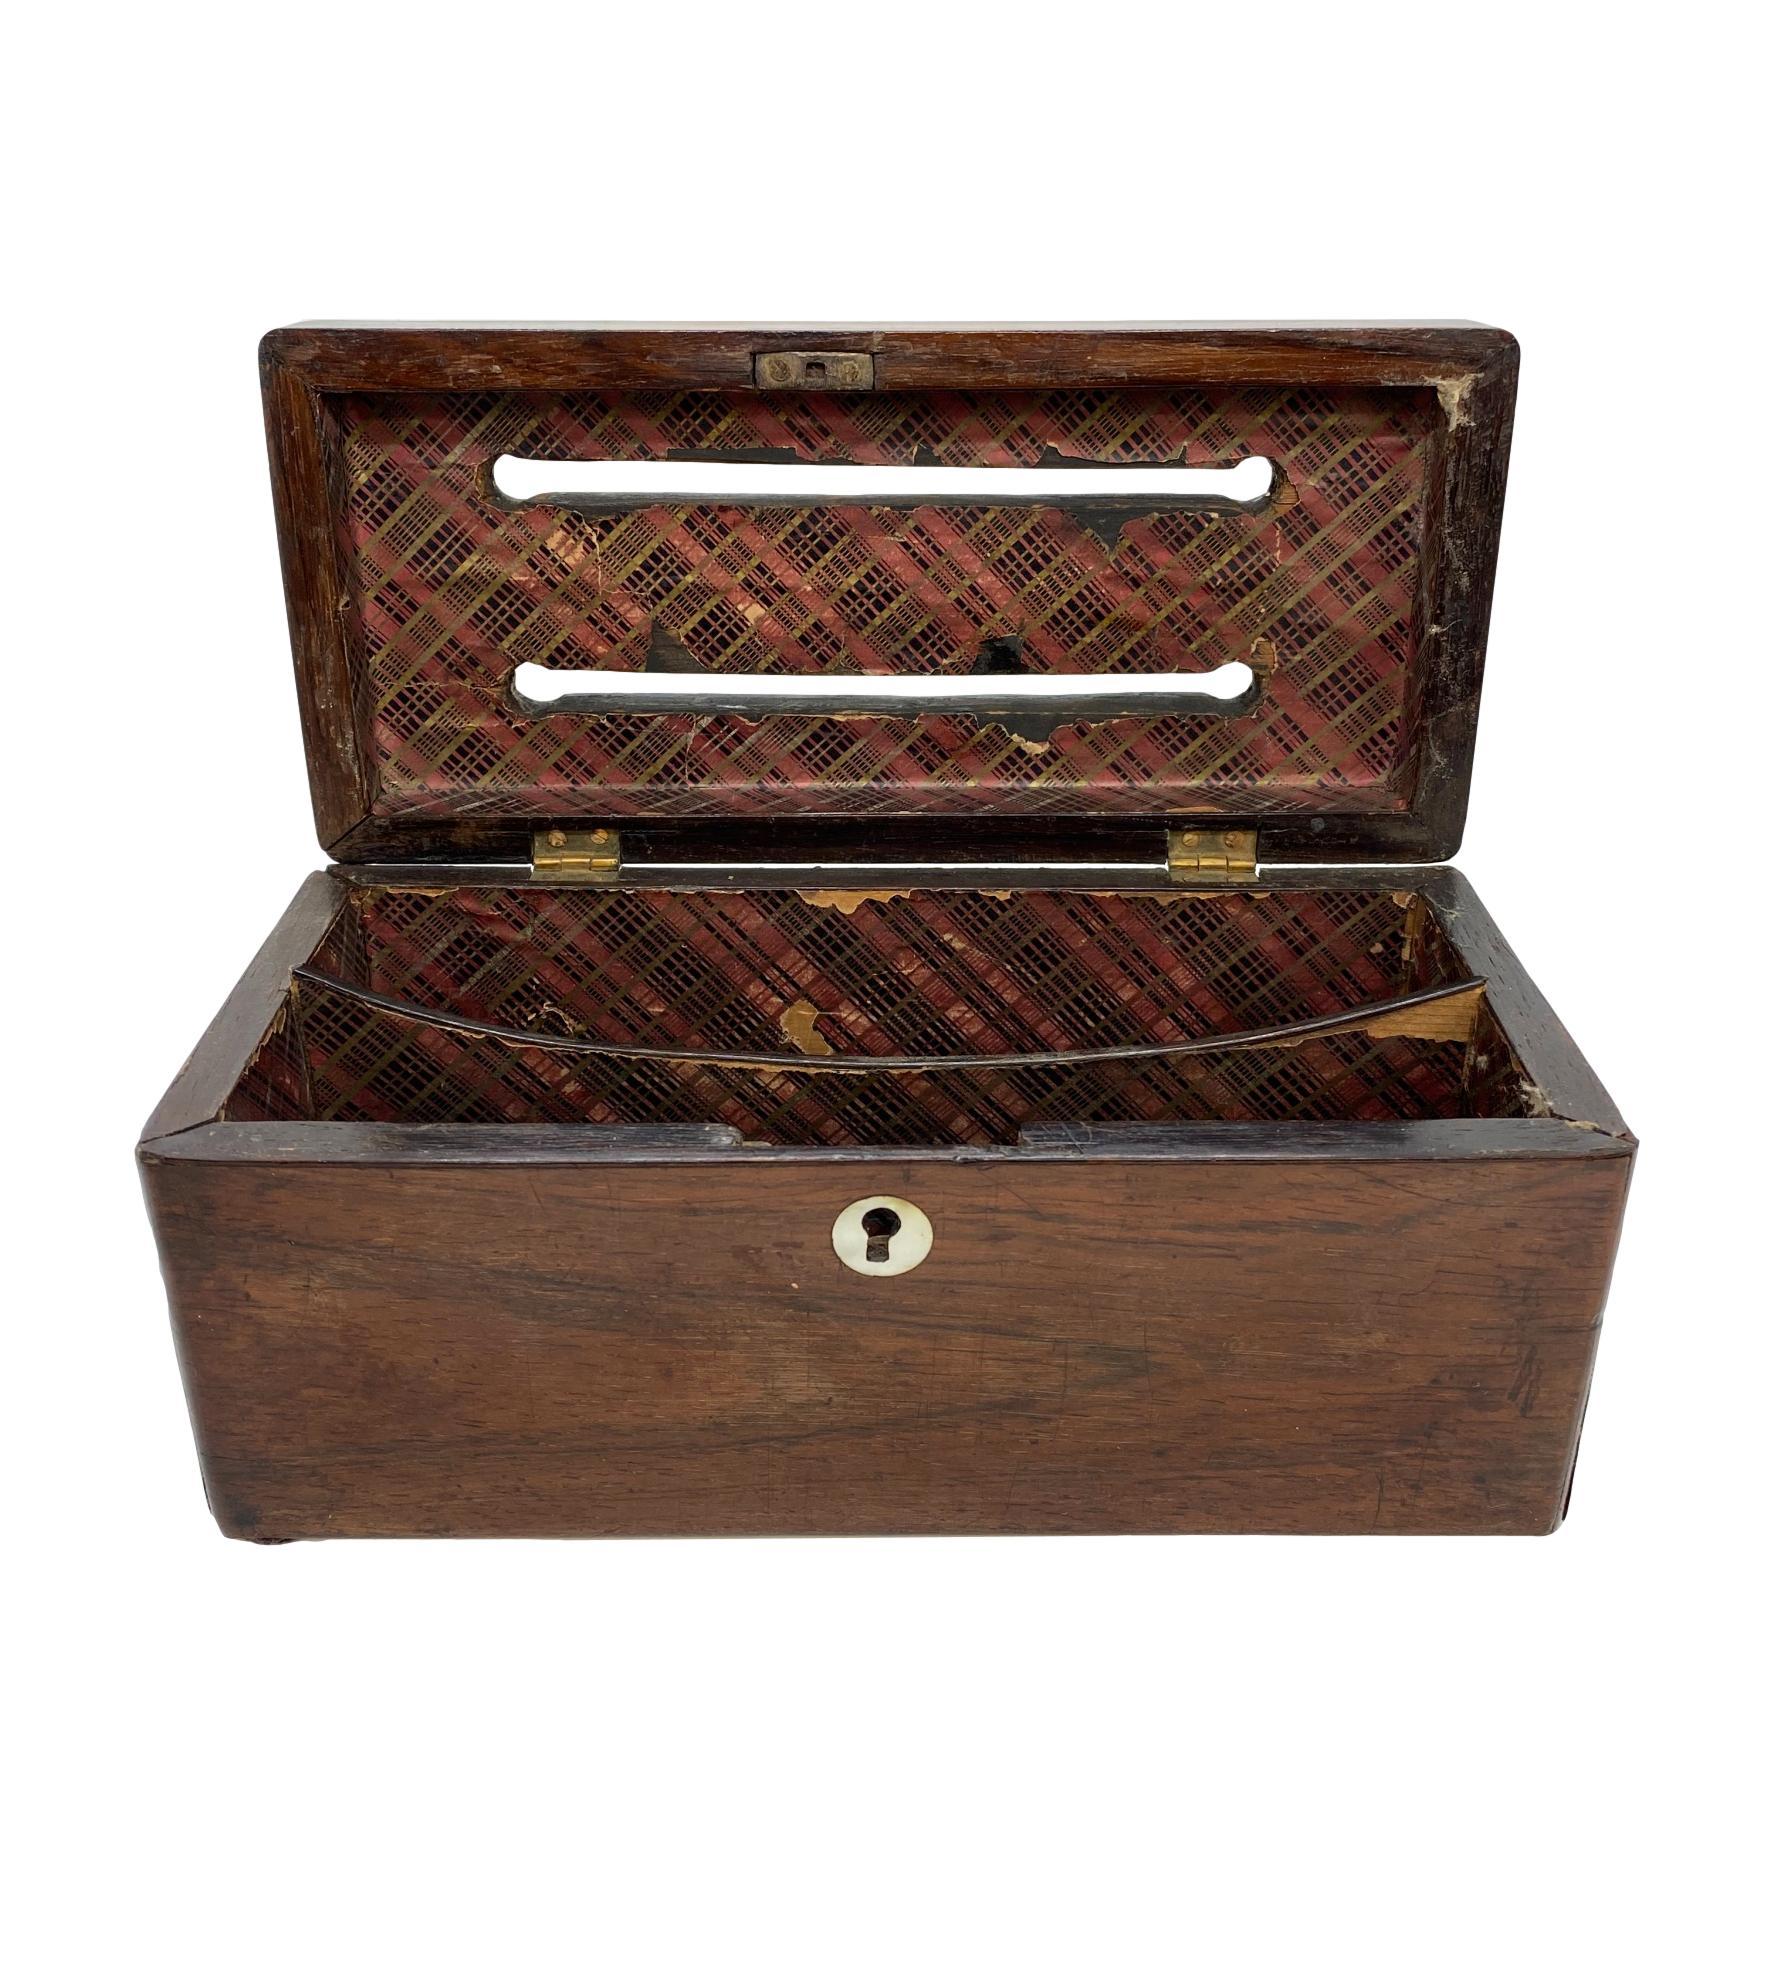 Victorian Antique Rosewood Letter Box with Mother-of-Pearl Plaques, English, ca. 1860